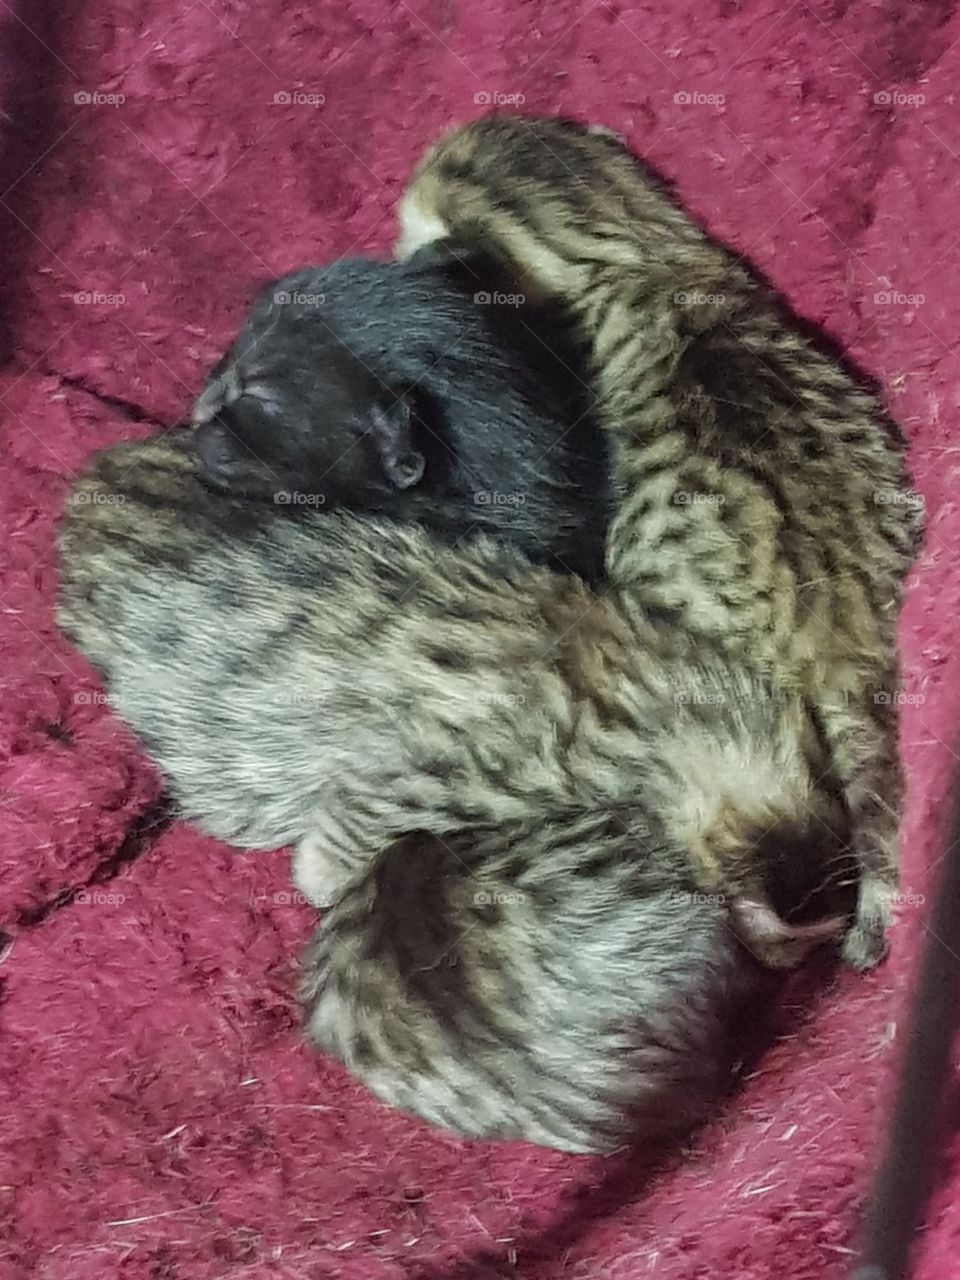 Kittens only a couple of hours old. Tiger Bengal sleeping in a snuggled heap